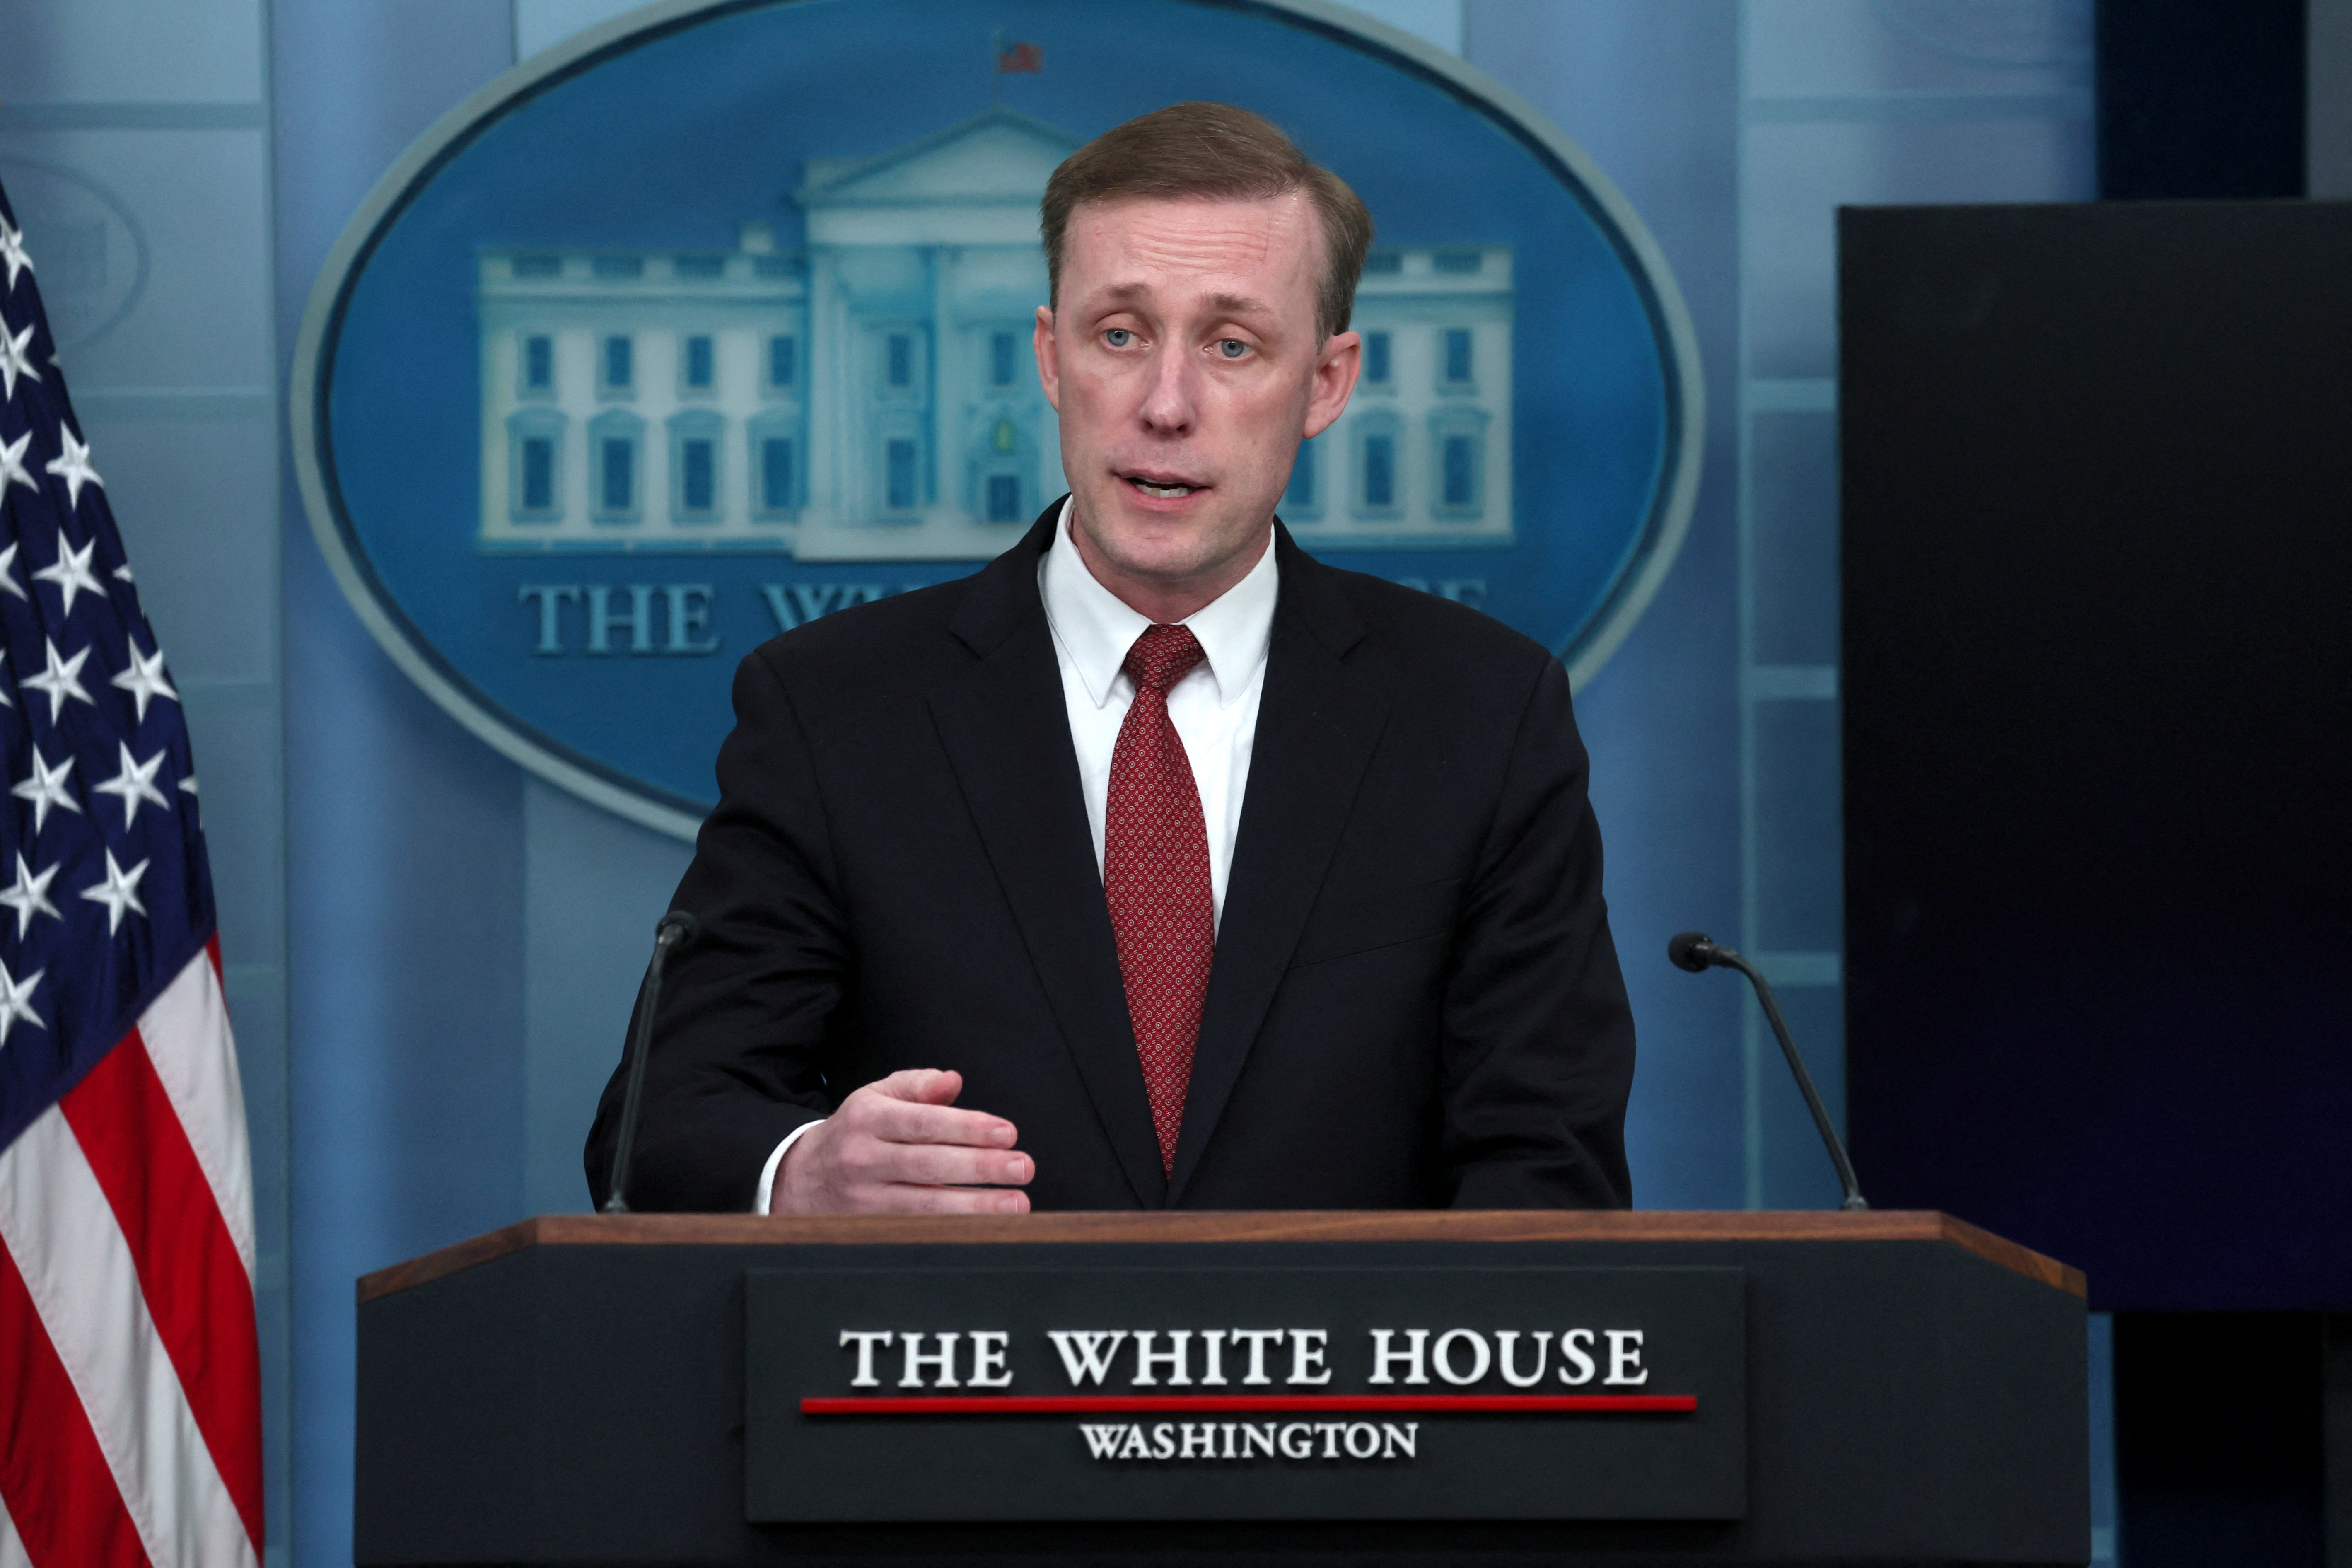 National Security Advisor Sullivan speaks during a press briefing at the White House in Washington